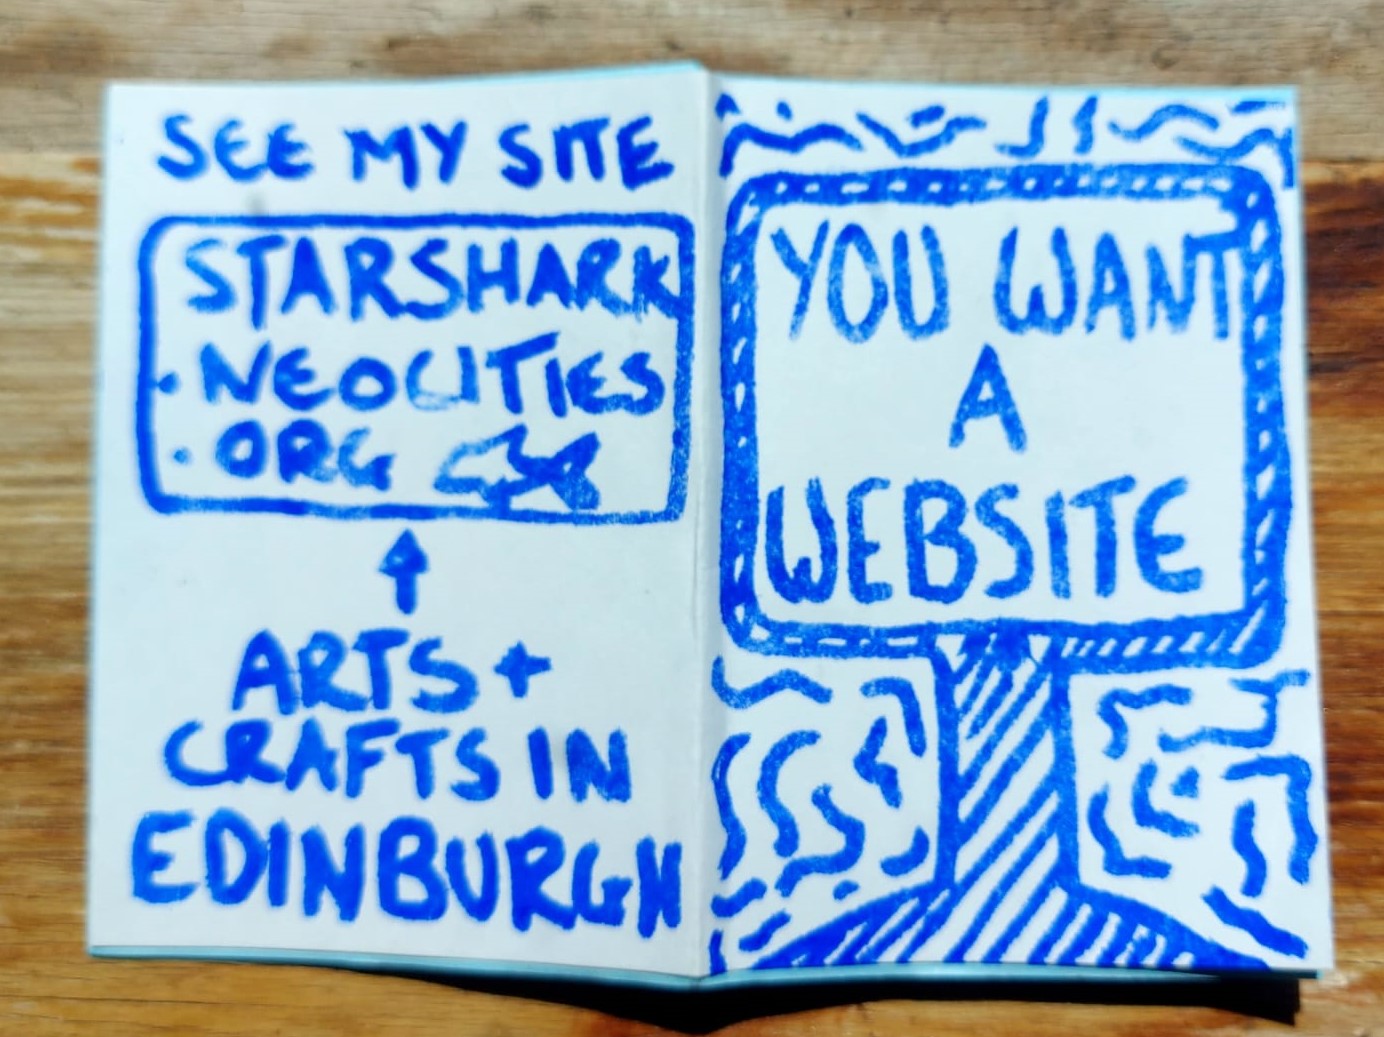 the cover and backpage of a mini zine. The cover reads 'YOU WANT A WEBSITE'. The backpage reads 'see my site starshark.neocities.org arts and crafts in Edinburgh'